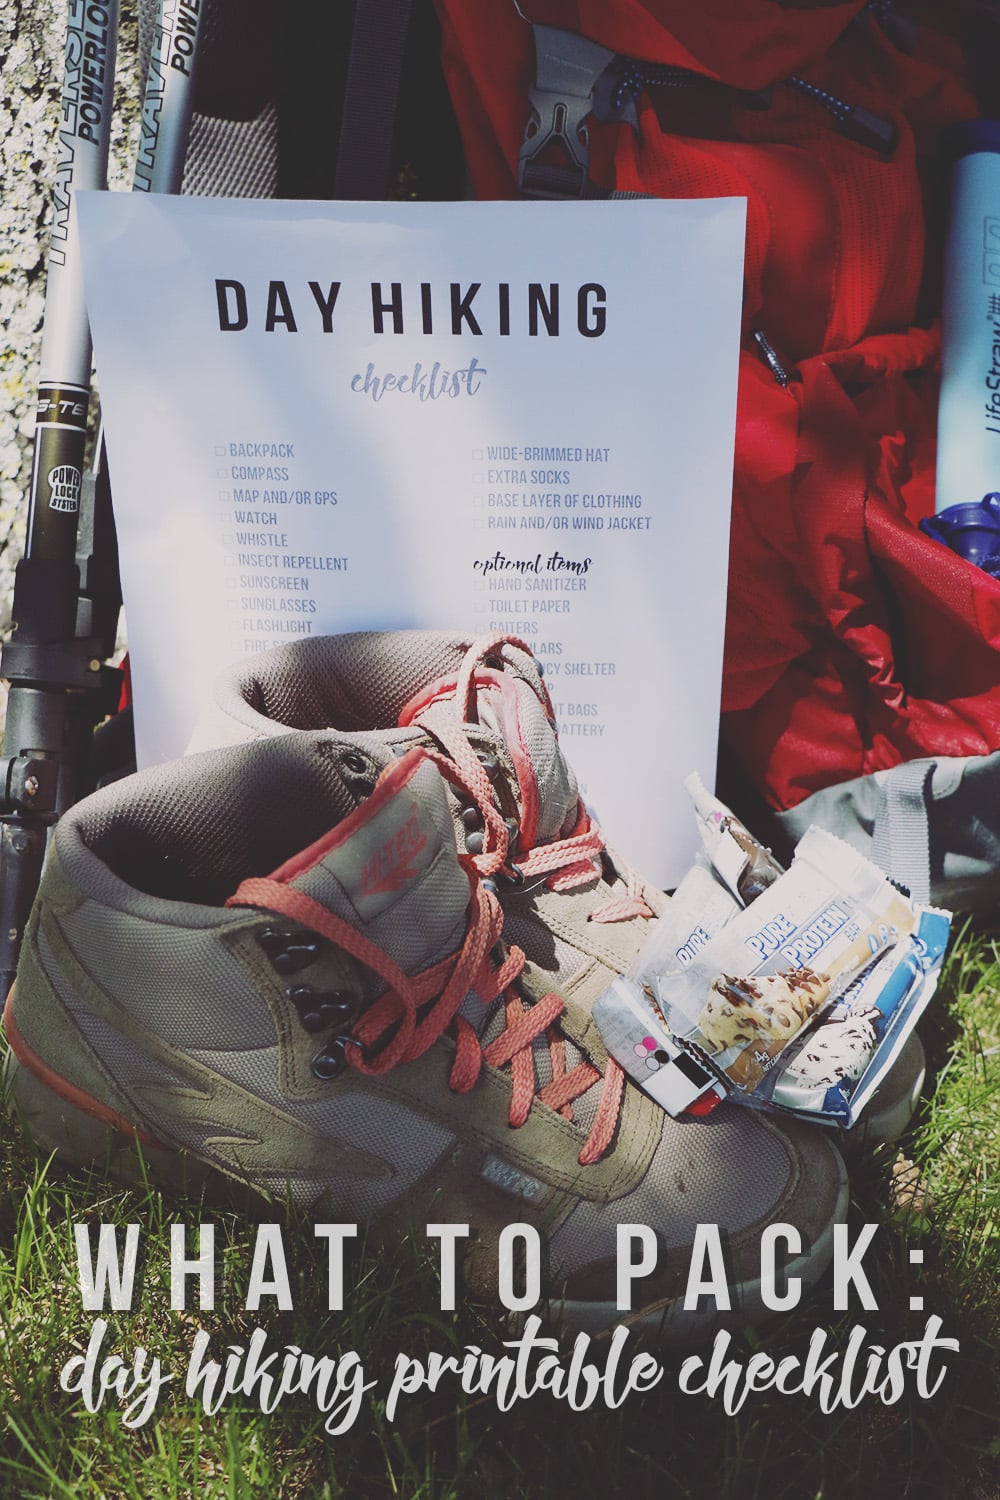 Hiking for the day? Be sure to check off this day hiking printable checklist before you go outdoors to make sure you bring all of the essentials!